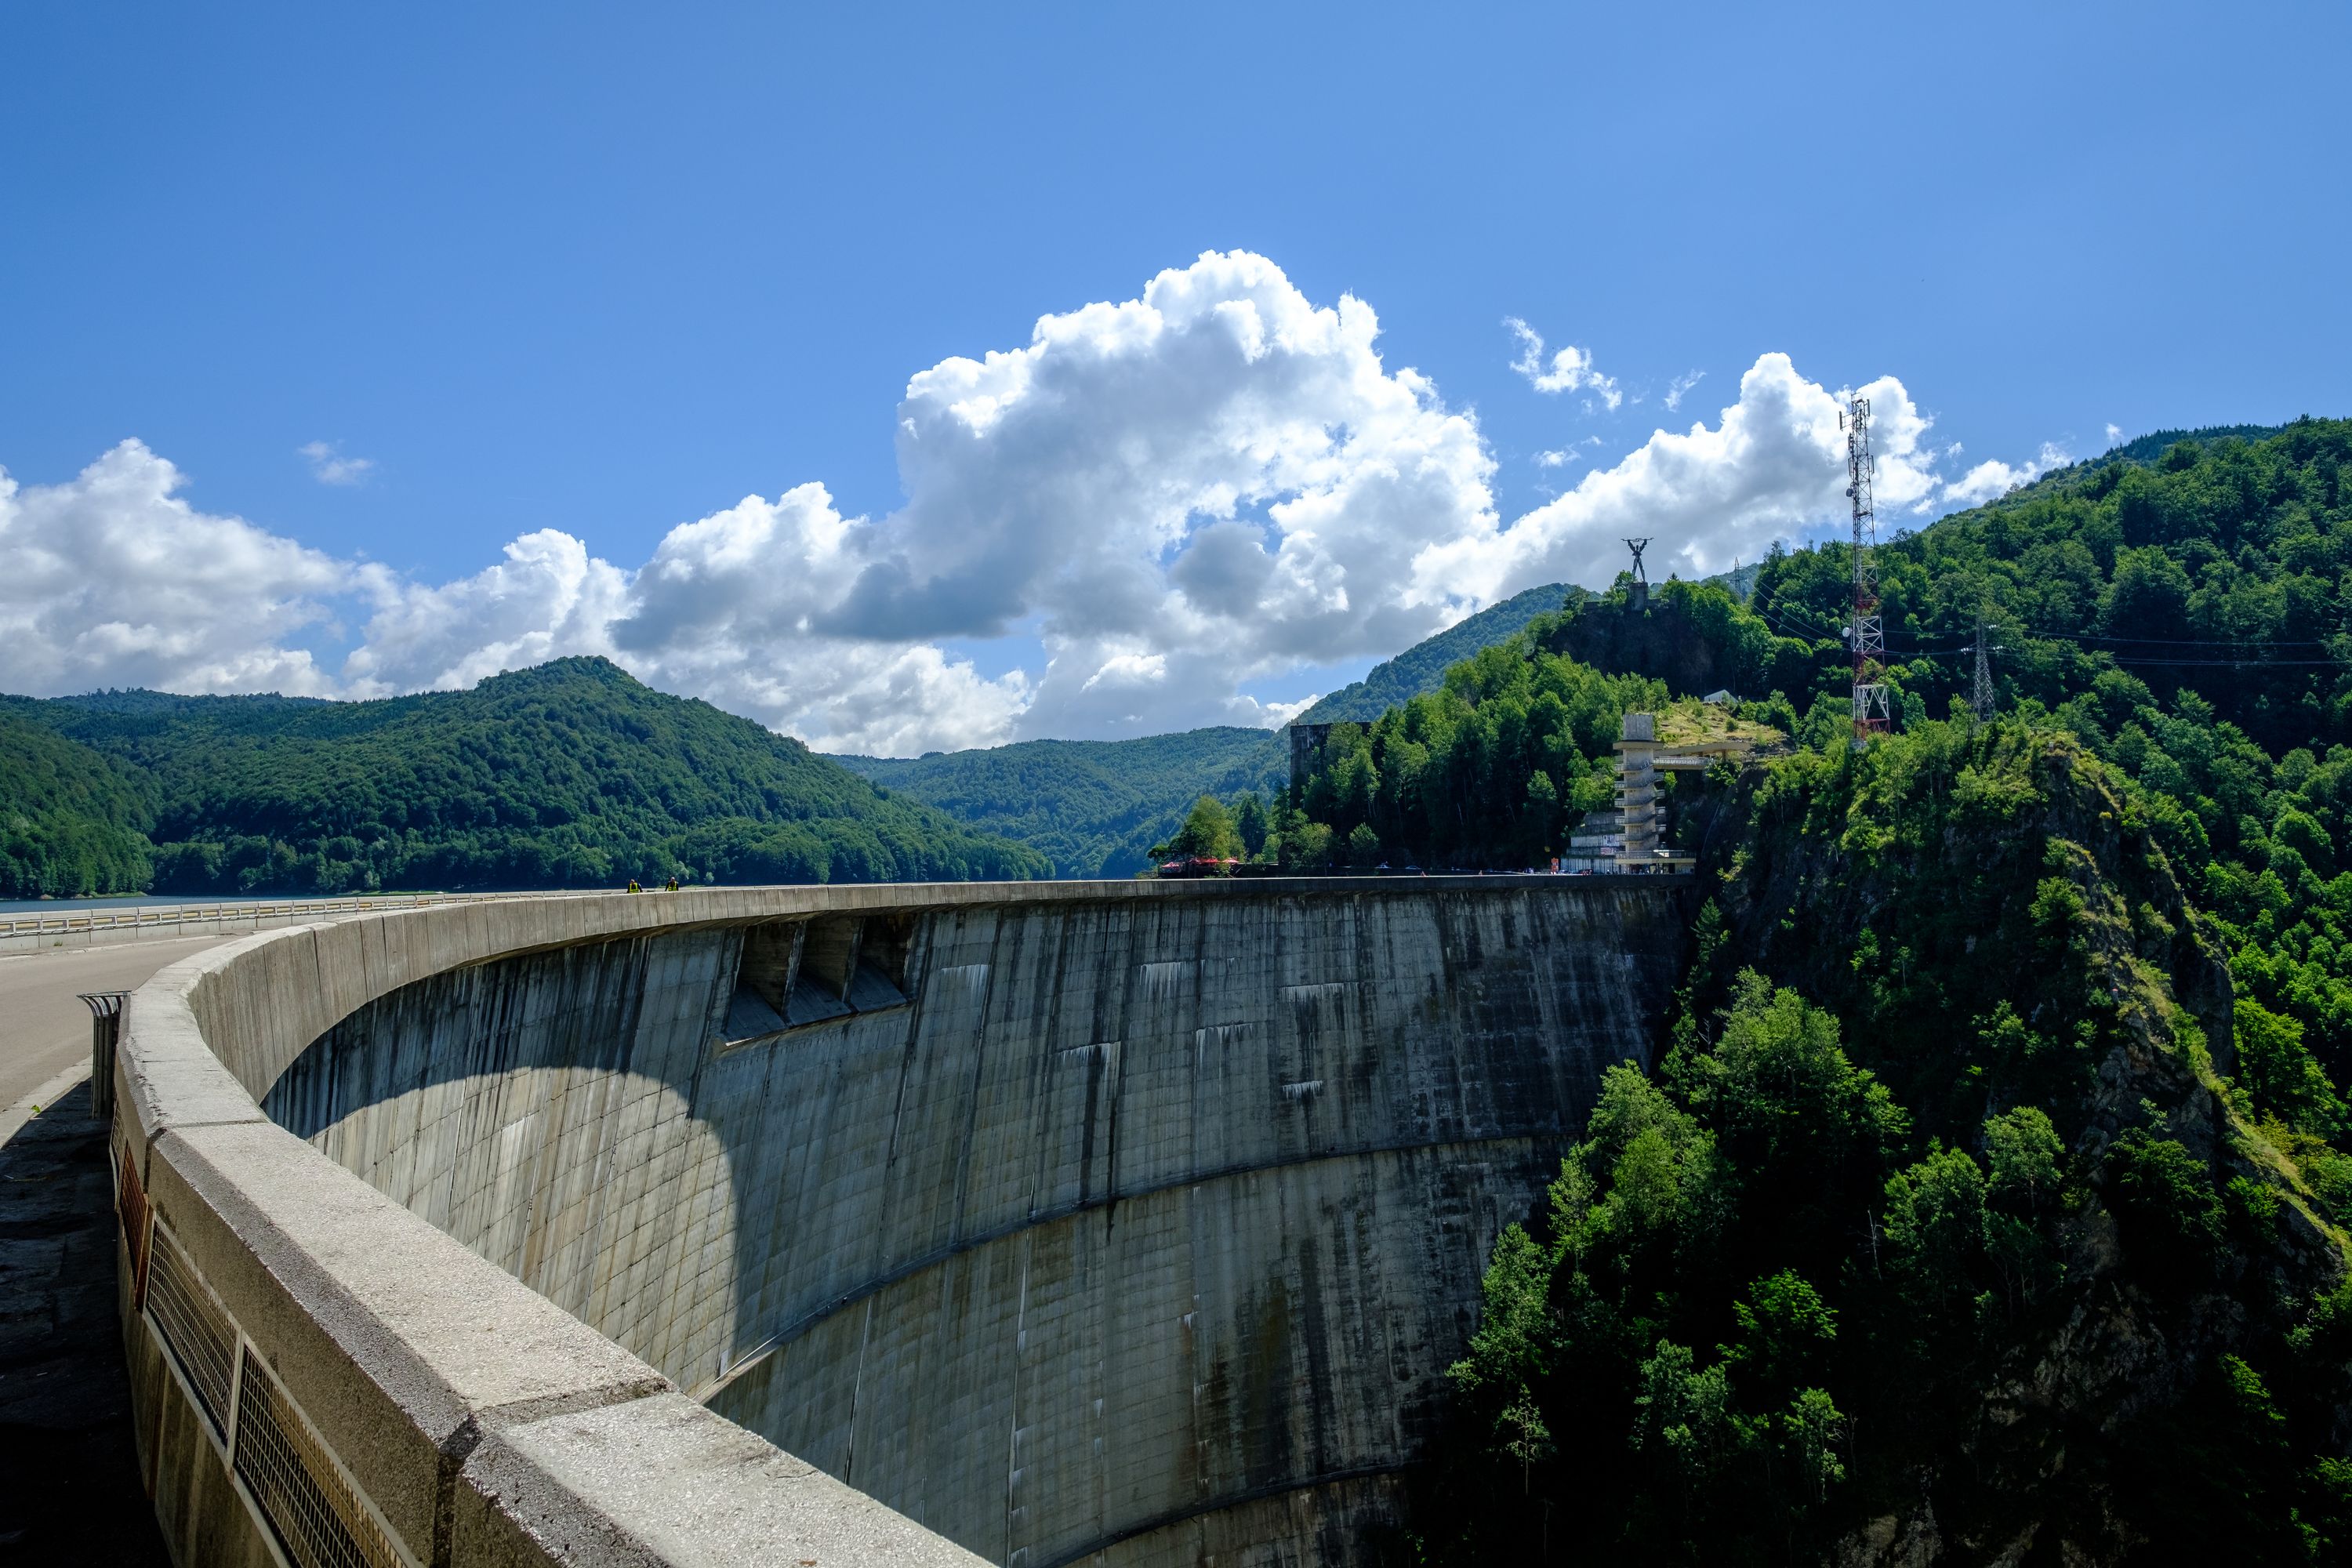 More than 500ft tall, the Vidraru dam is one of the largest in Europe. Fujifilm X-Pro 2 + 14mm: 1/300 @ ƒ/7.1 ISO 400